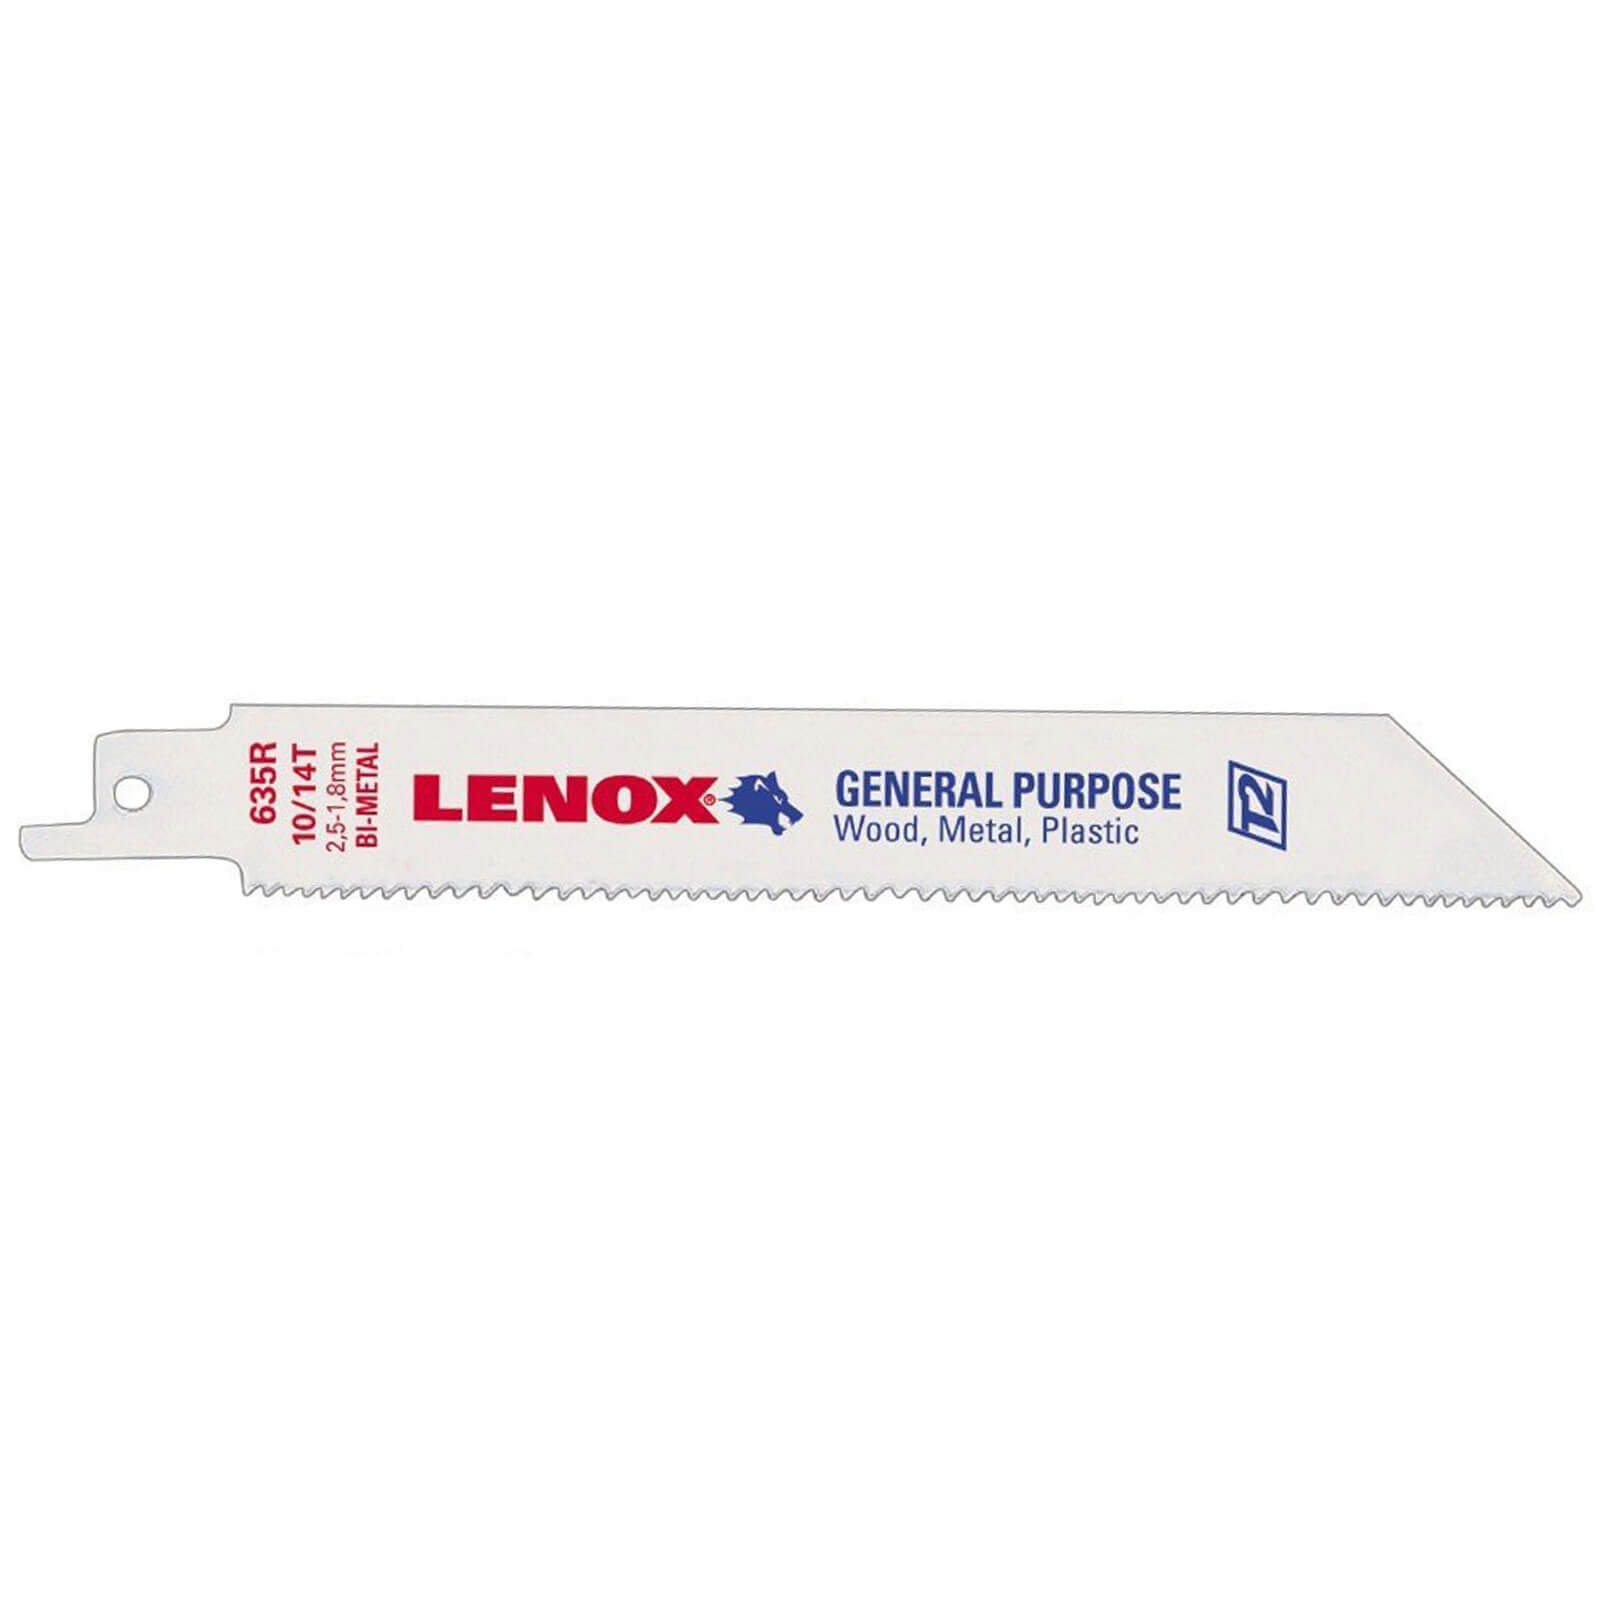 Photos - Power Tool Accessory Lenox Multi Material Reciprocating Sabre Saw Blades 152mm Pack of 5 176934 